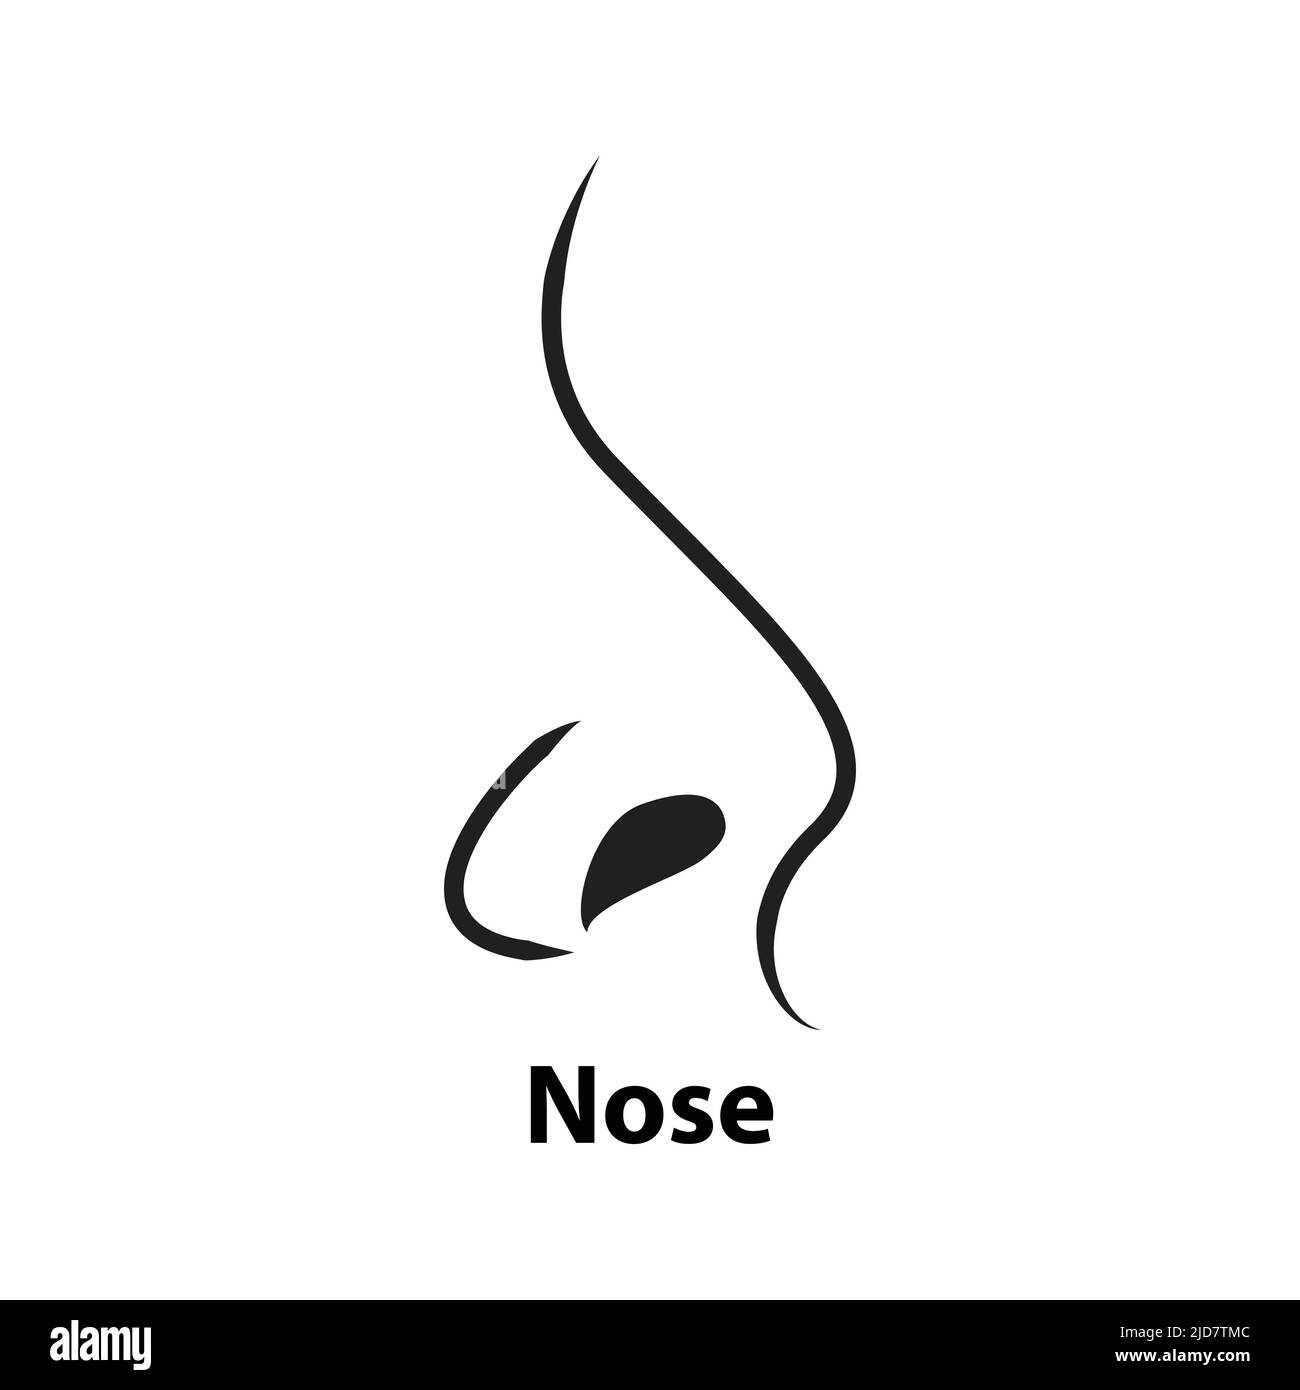 simple Nose Outline Vector Illustration. on white background Stock Vector